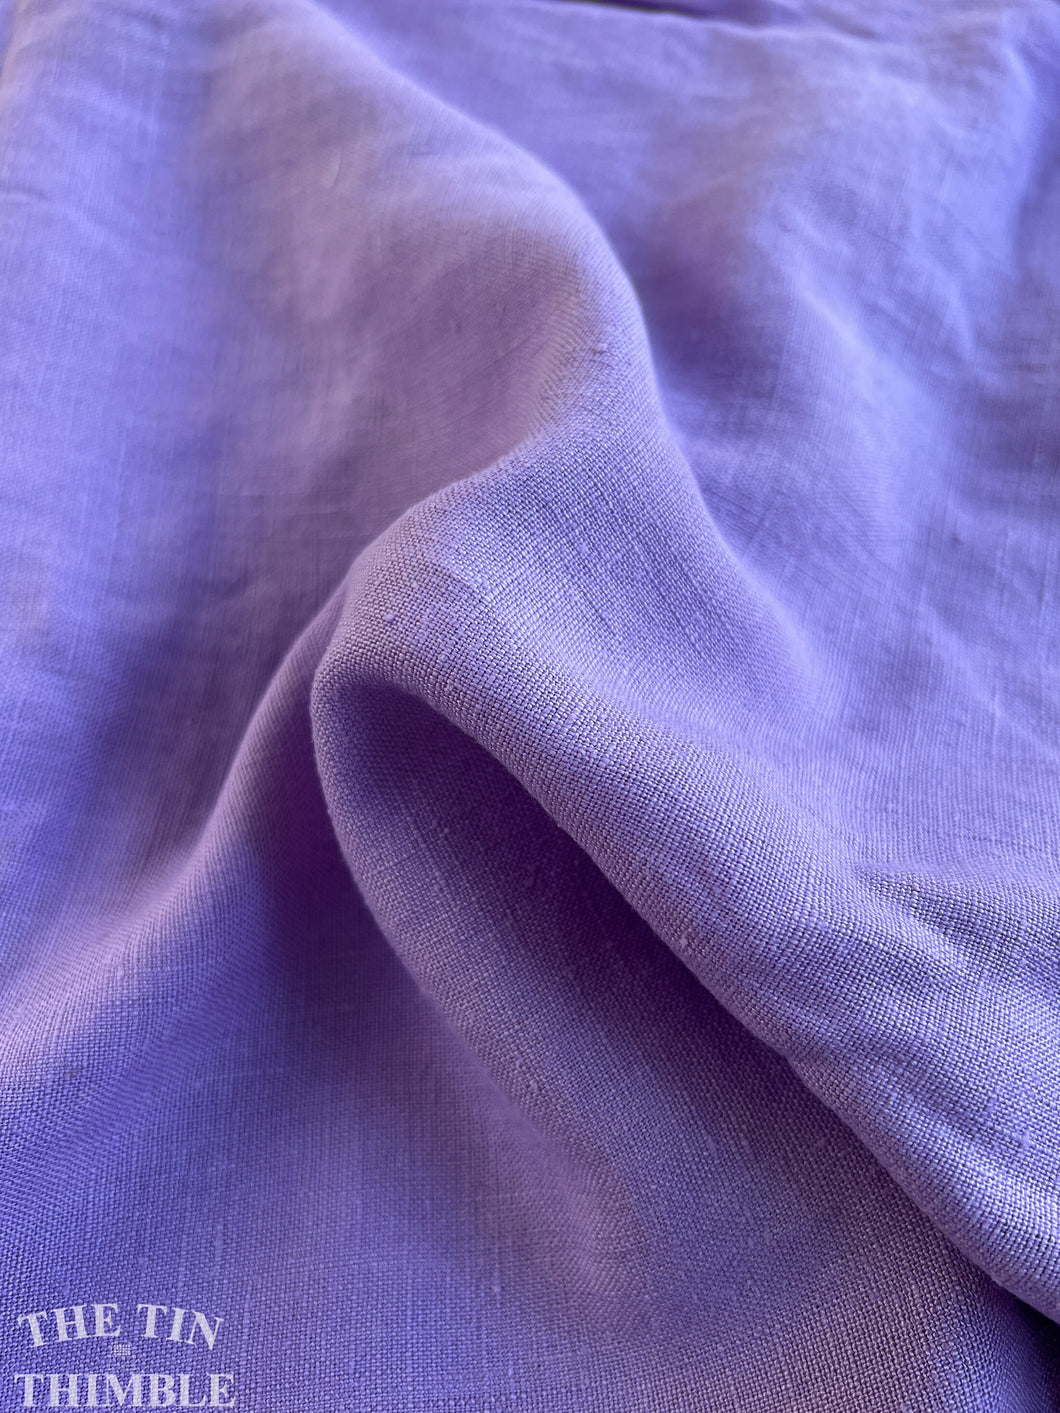 Vintage Pure Linen - 1 Yard - Lilac Linen with Beautiful Hand and Drape - 34